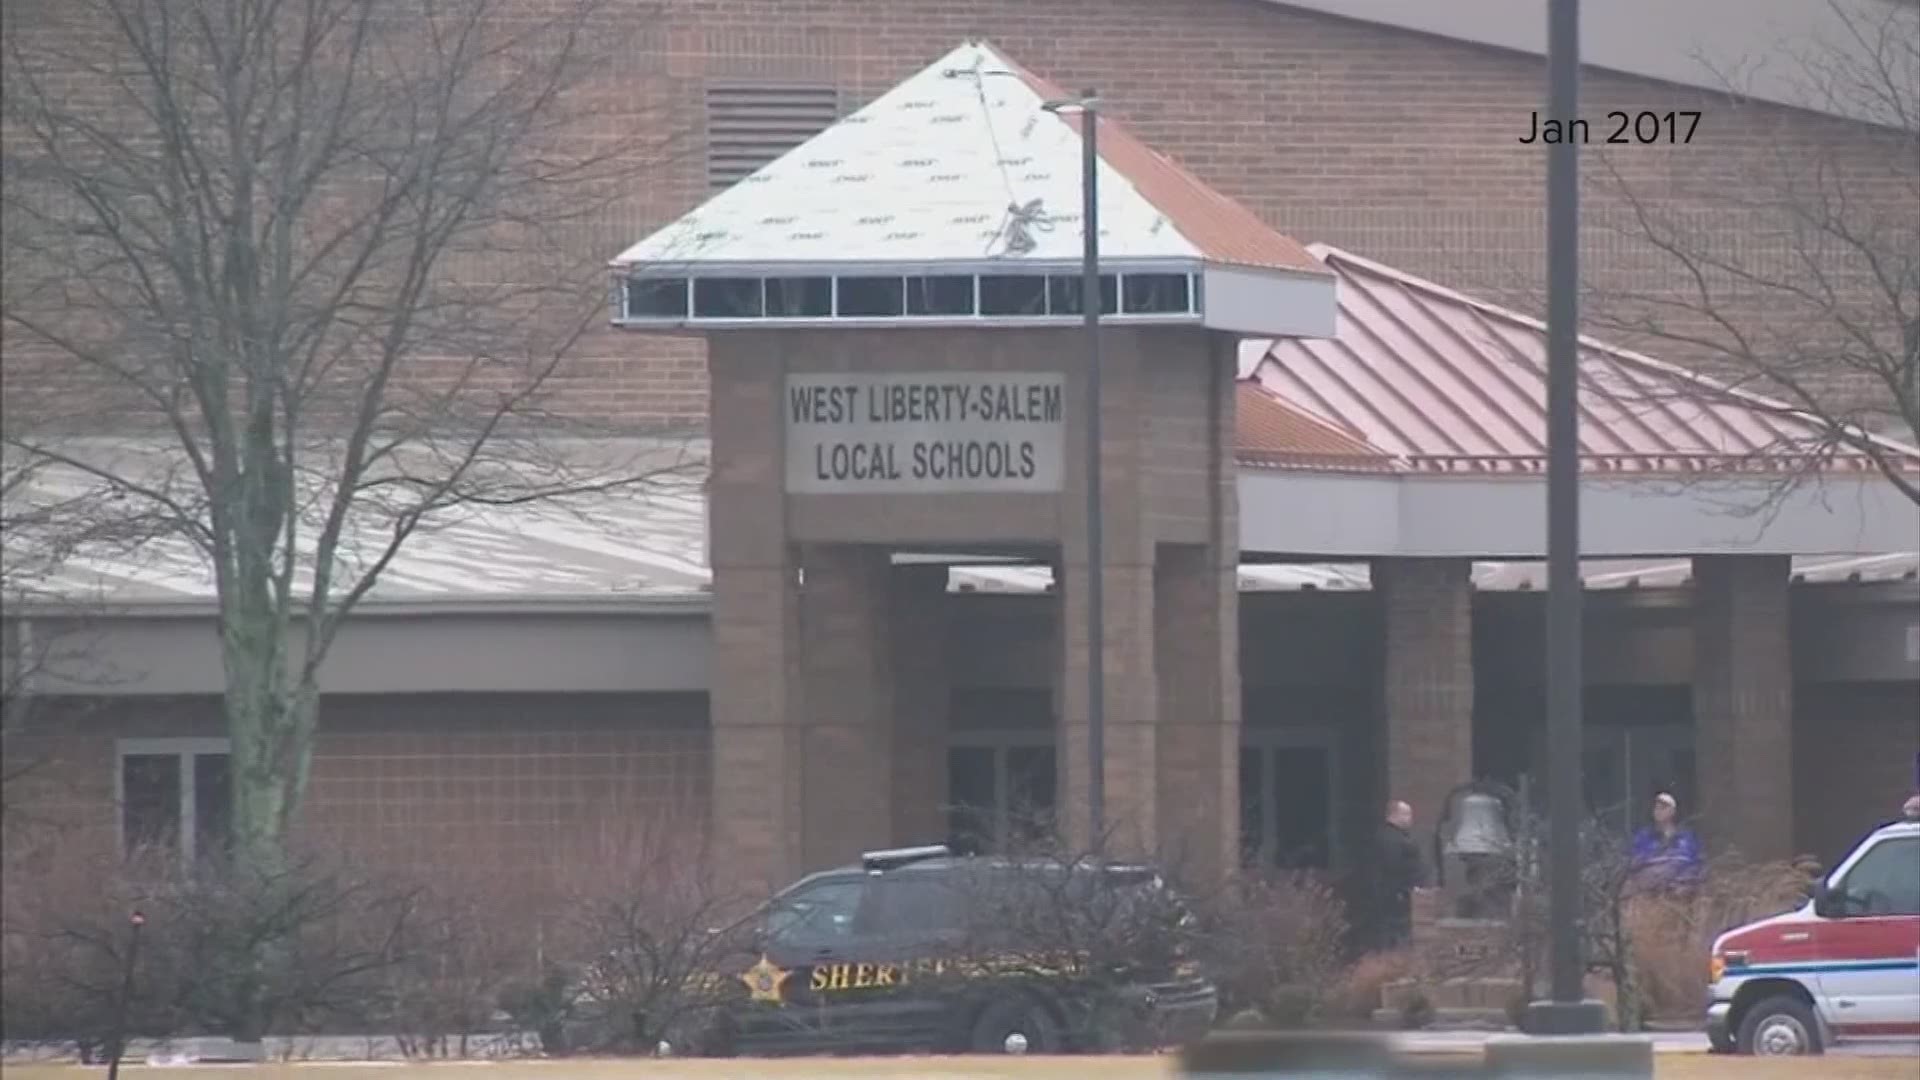 The superintendent of West-Liberty Salem School District, which had a school shooting in 2017, says they do not allow armed faculty members.